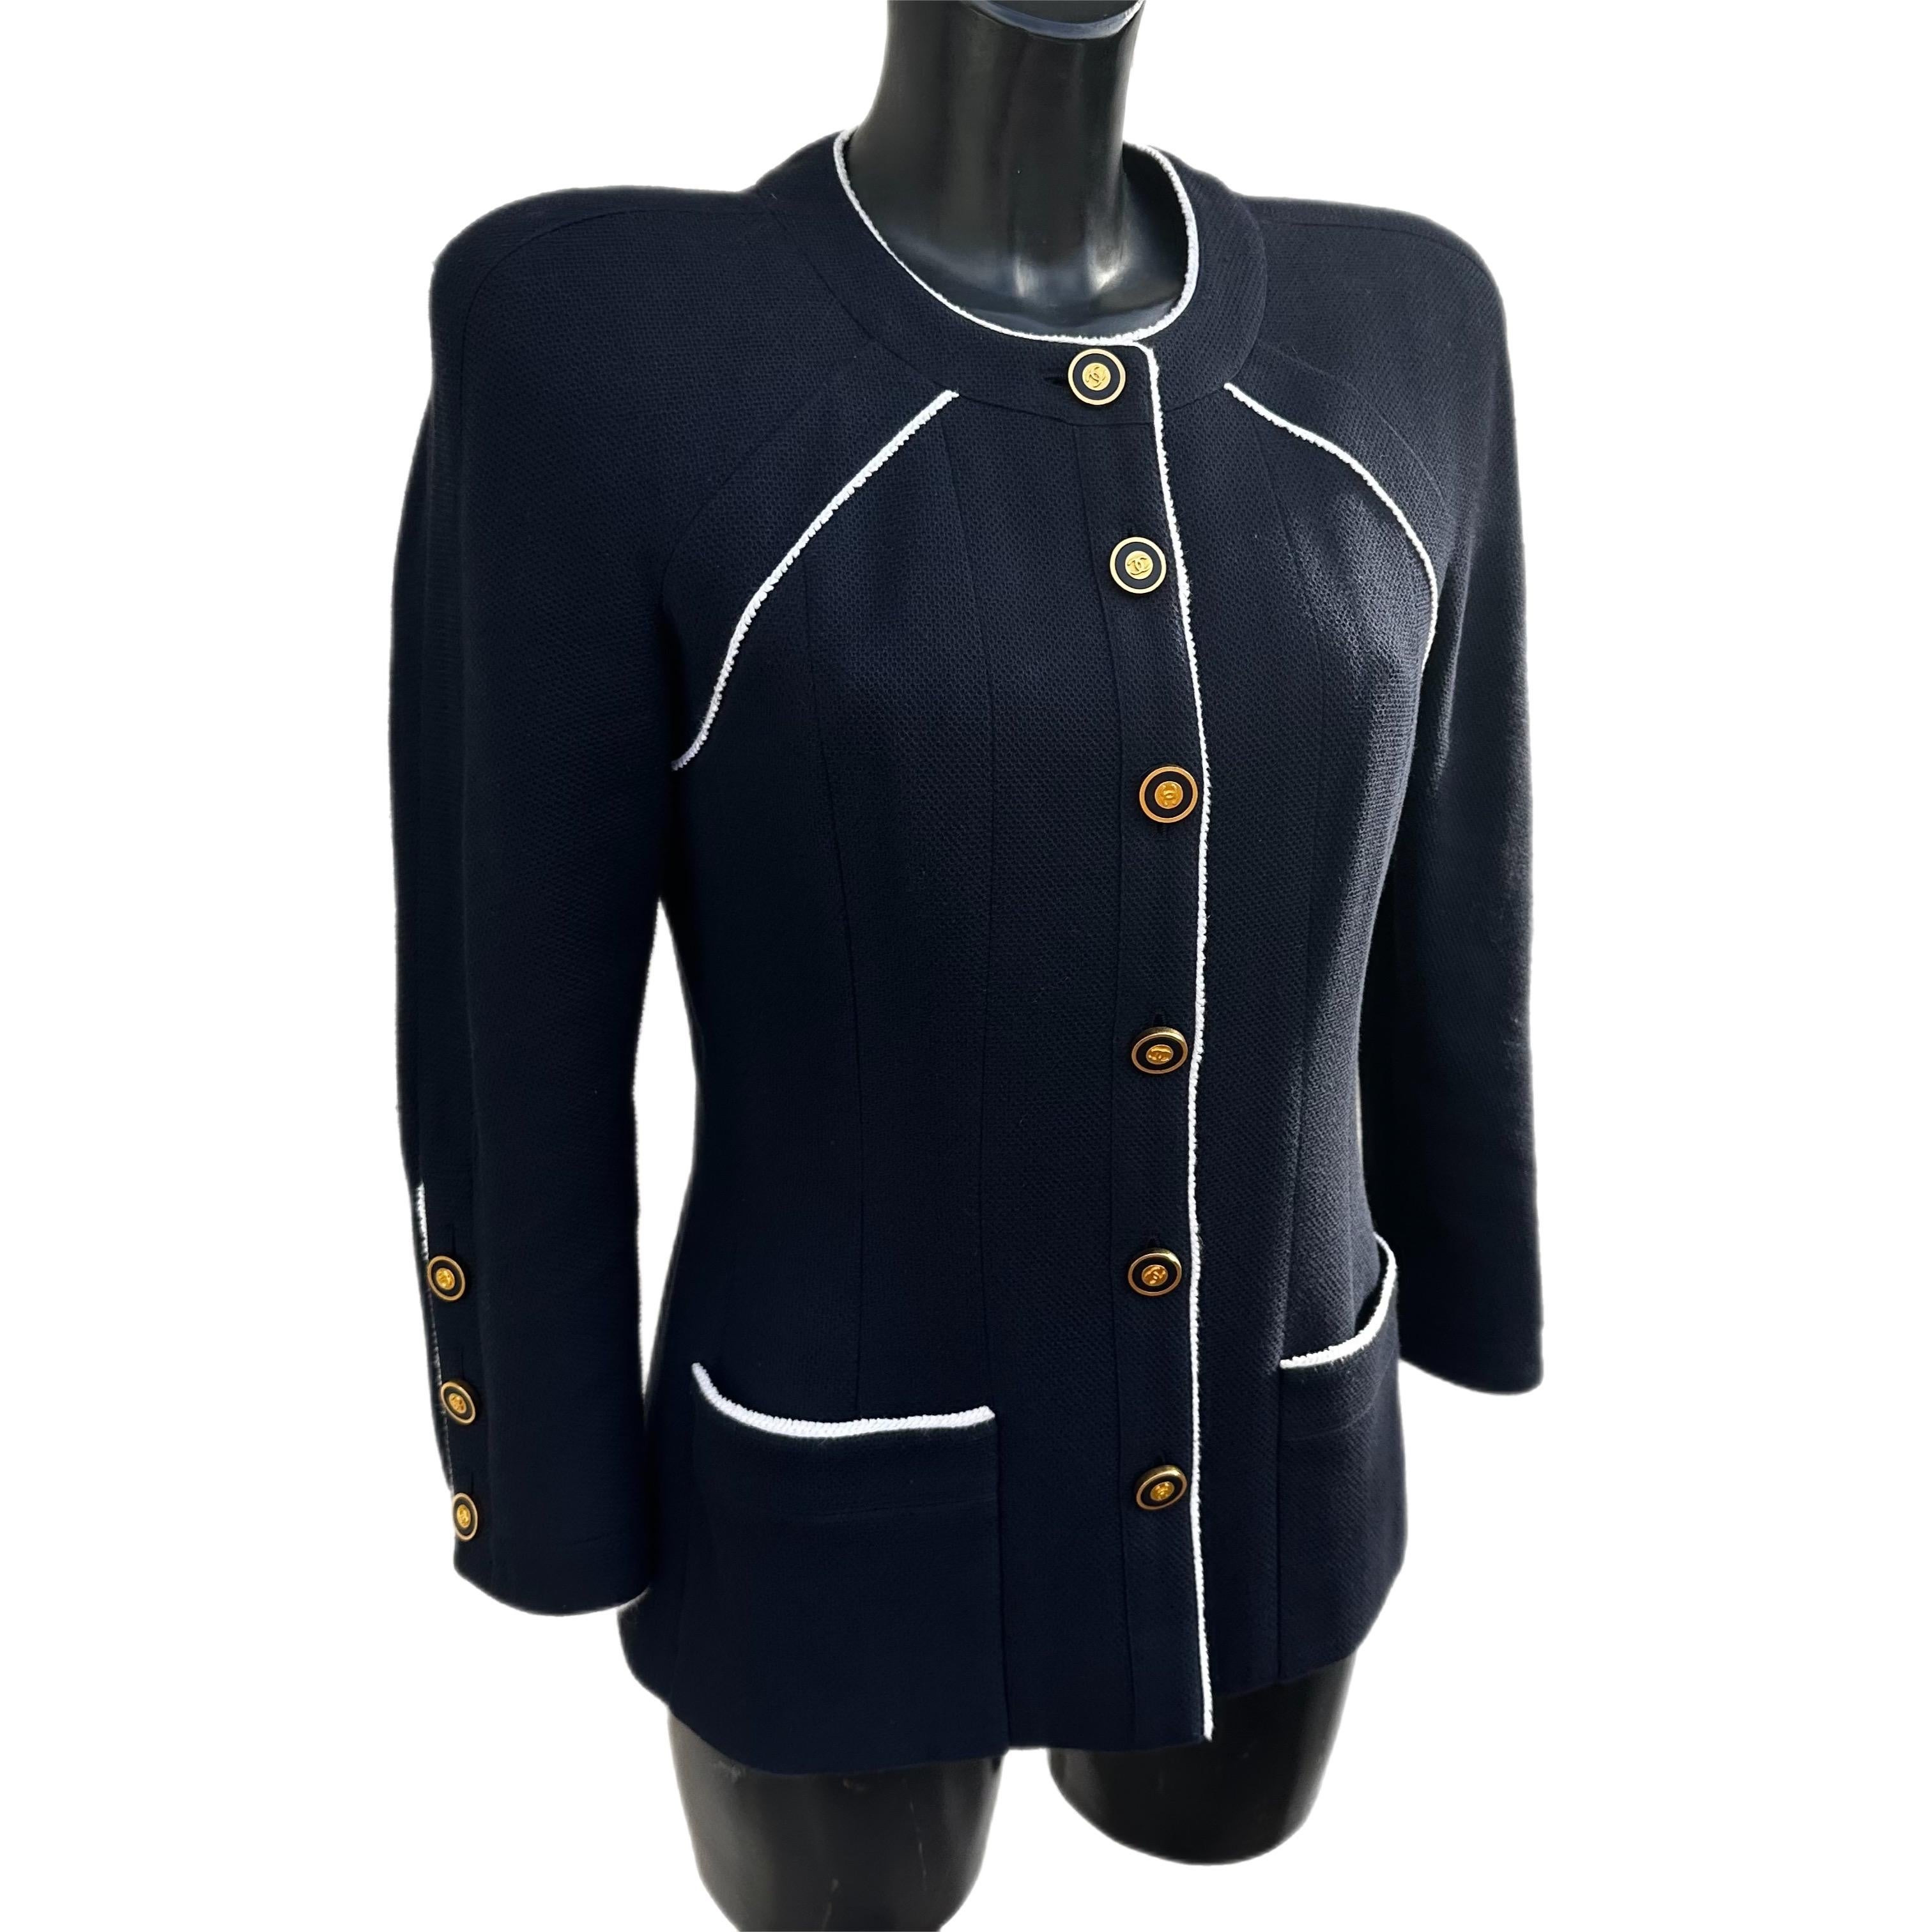 Chanel 1996 Cruiser Jacket. White and navy blue honeycomb cup with round neckline. long raglan sleeves, logoed buttons, single-breasted with two front pockets.
golden chain inside the bottom of the jacket for an impeccable seal.
Measures:
Length